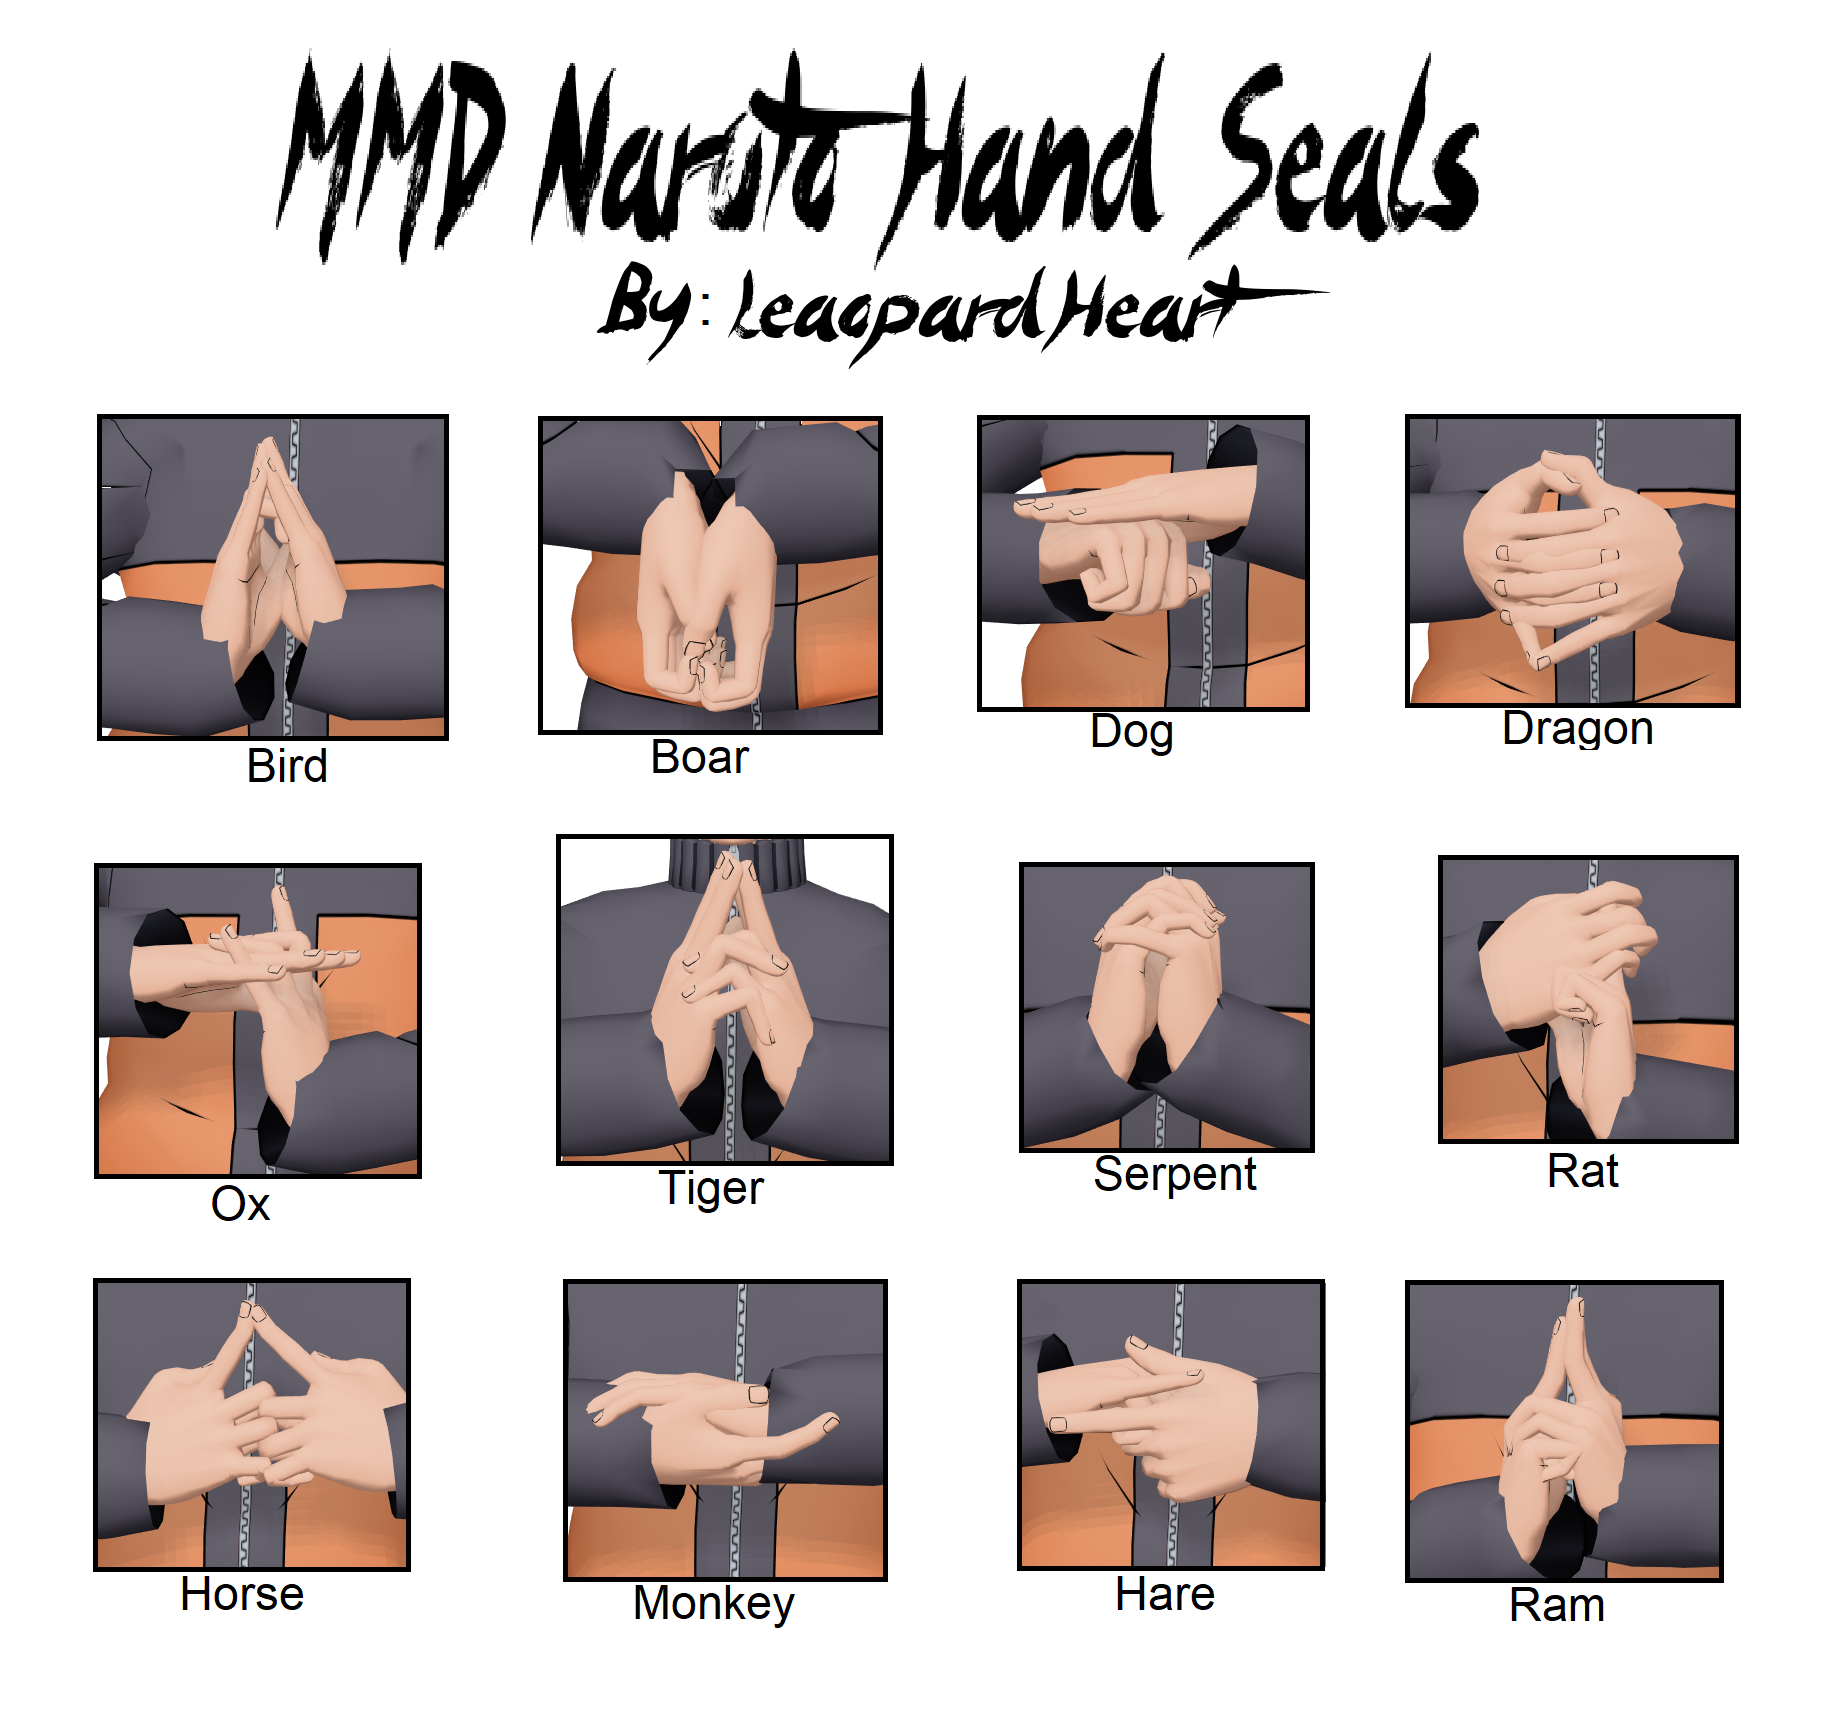 Mmd Naruto Hand Seal Pose Pack Dl By Leaopardheart On Deviantart.